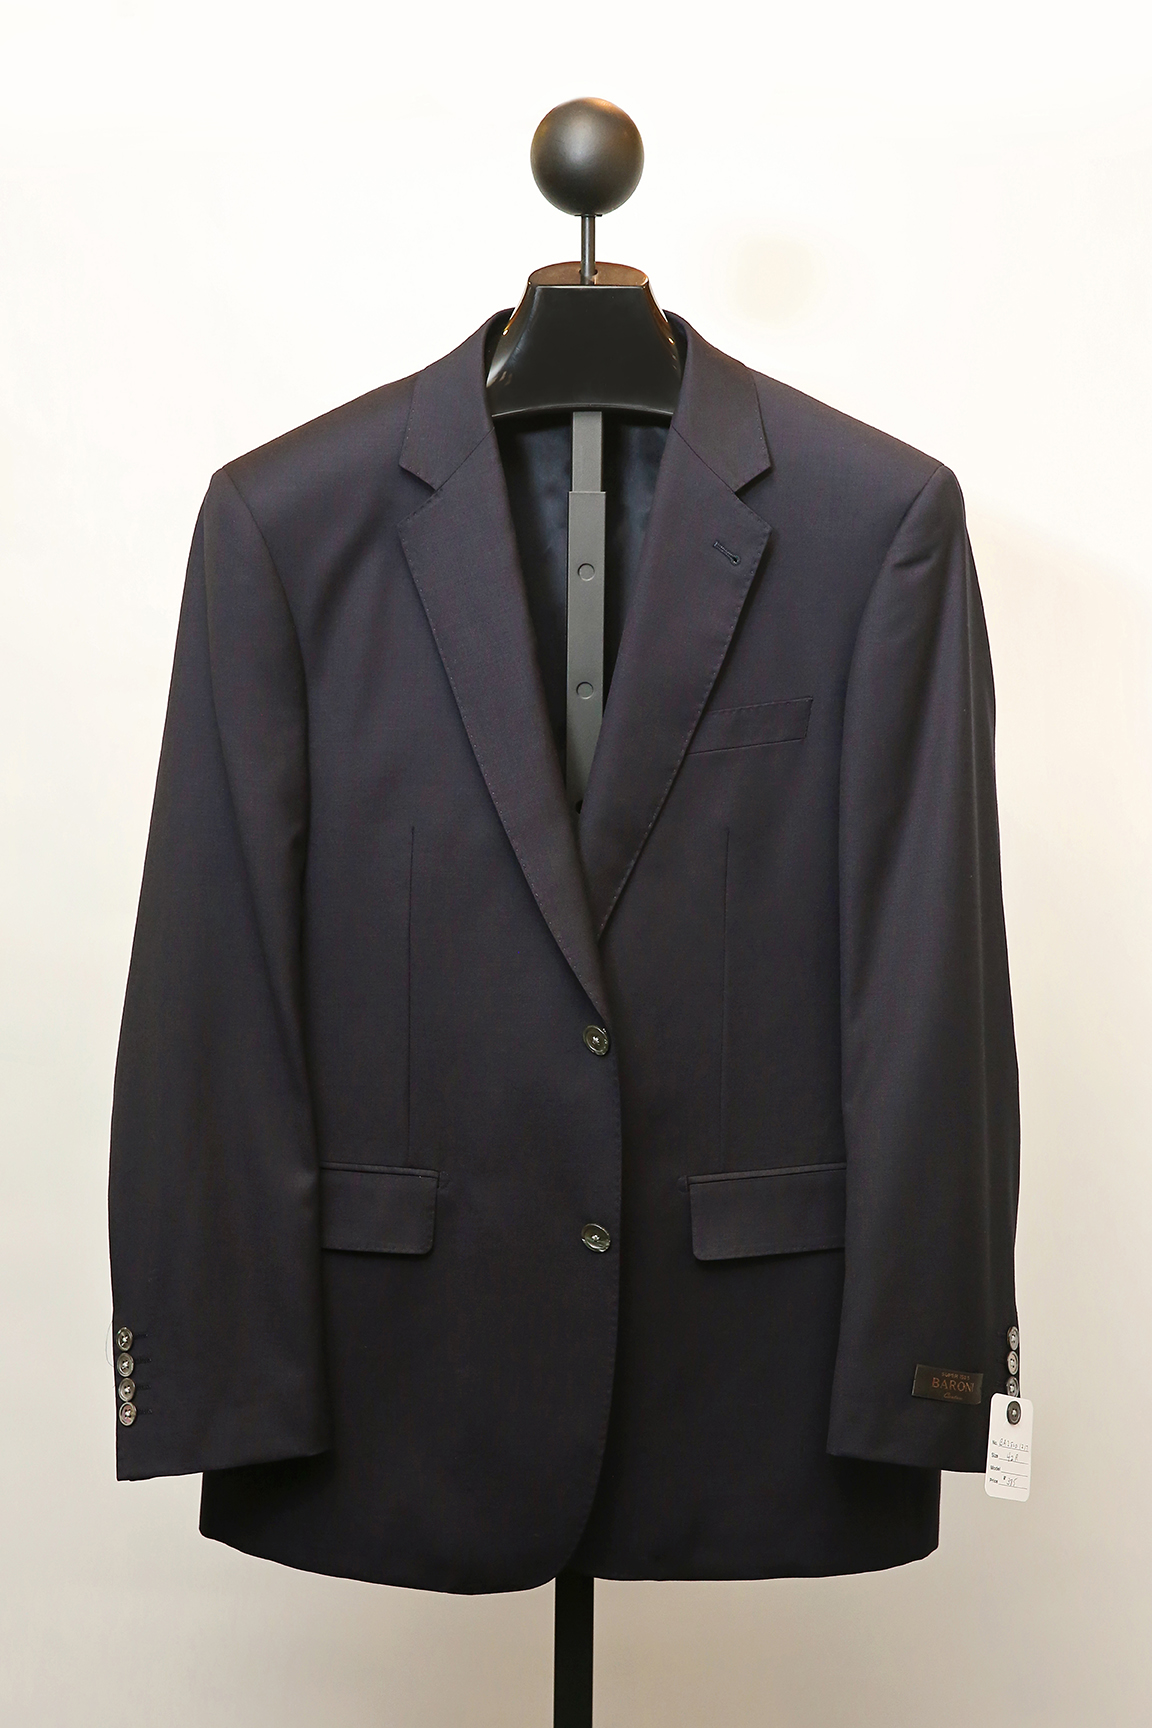 Classic Fit Suit by Baroni | Angelos Custom Tailoring & Menswear